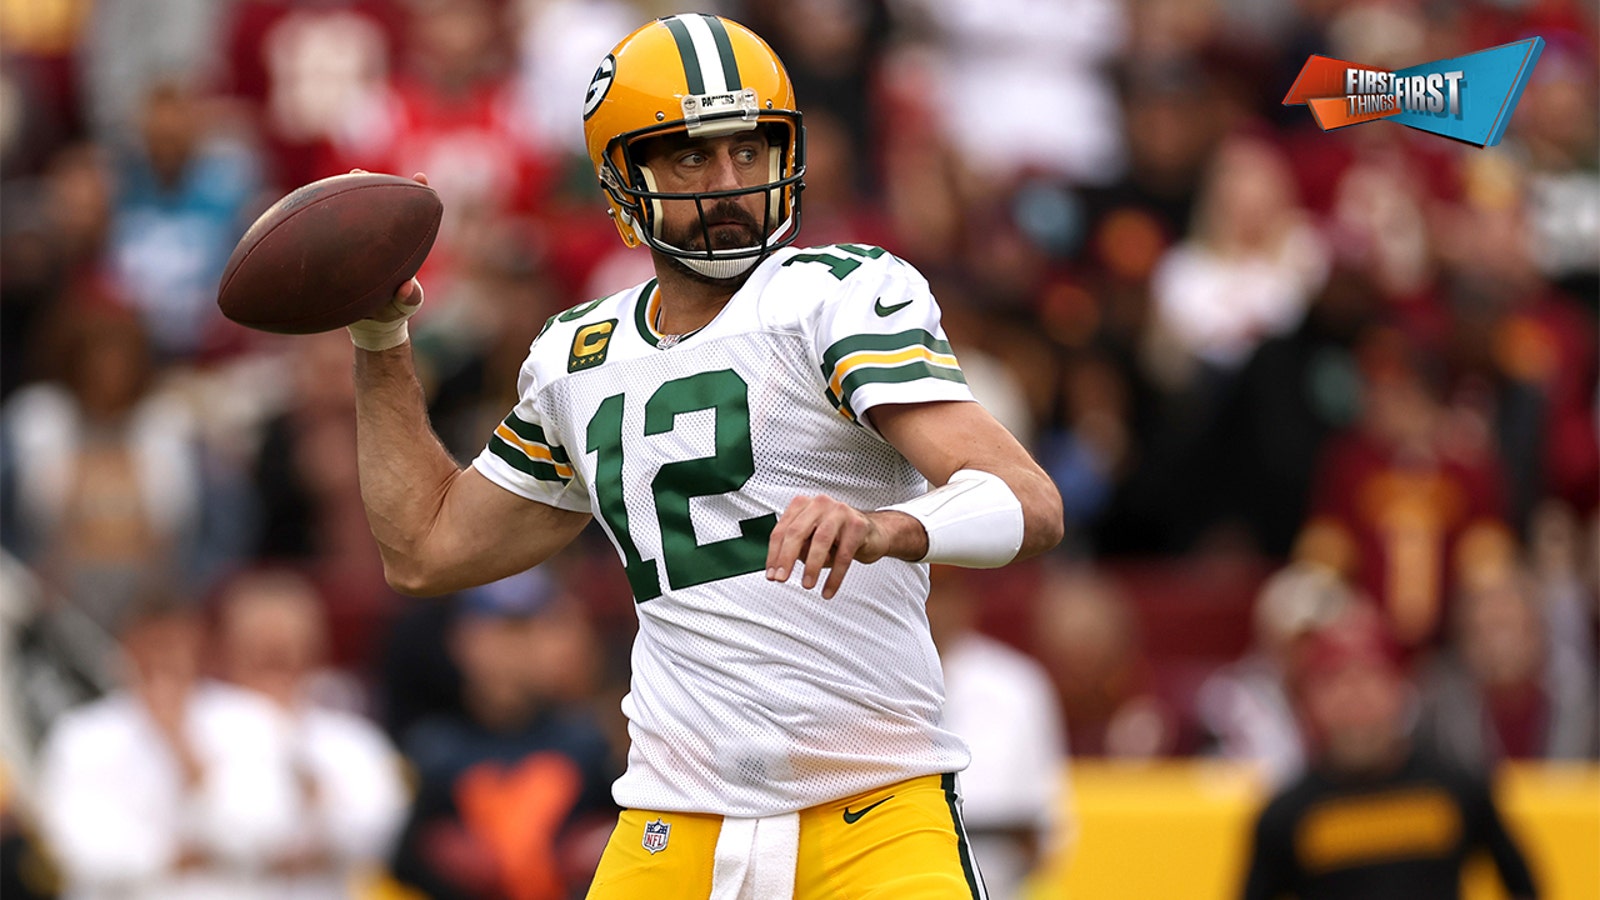 Aaron Rodgers says teammates who make too many mistakes shouldn't play